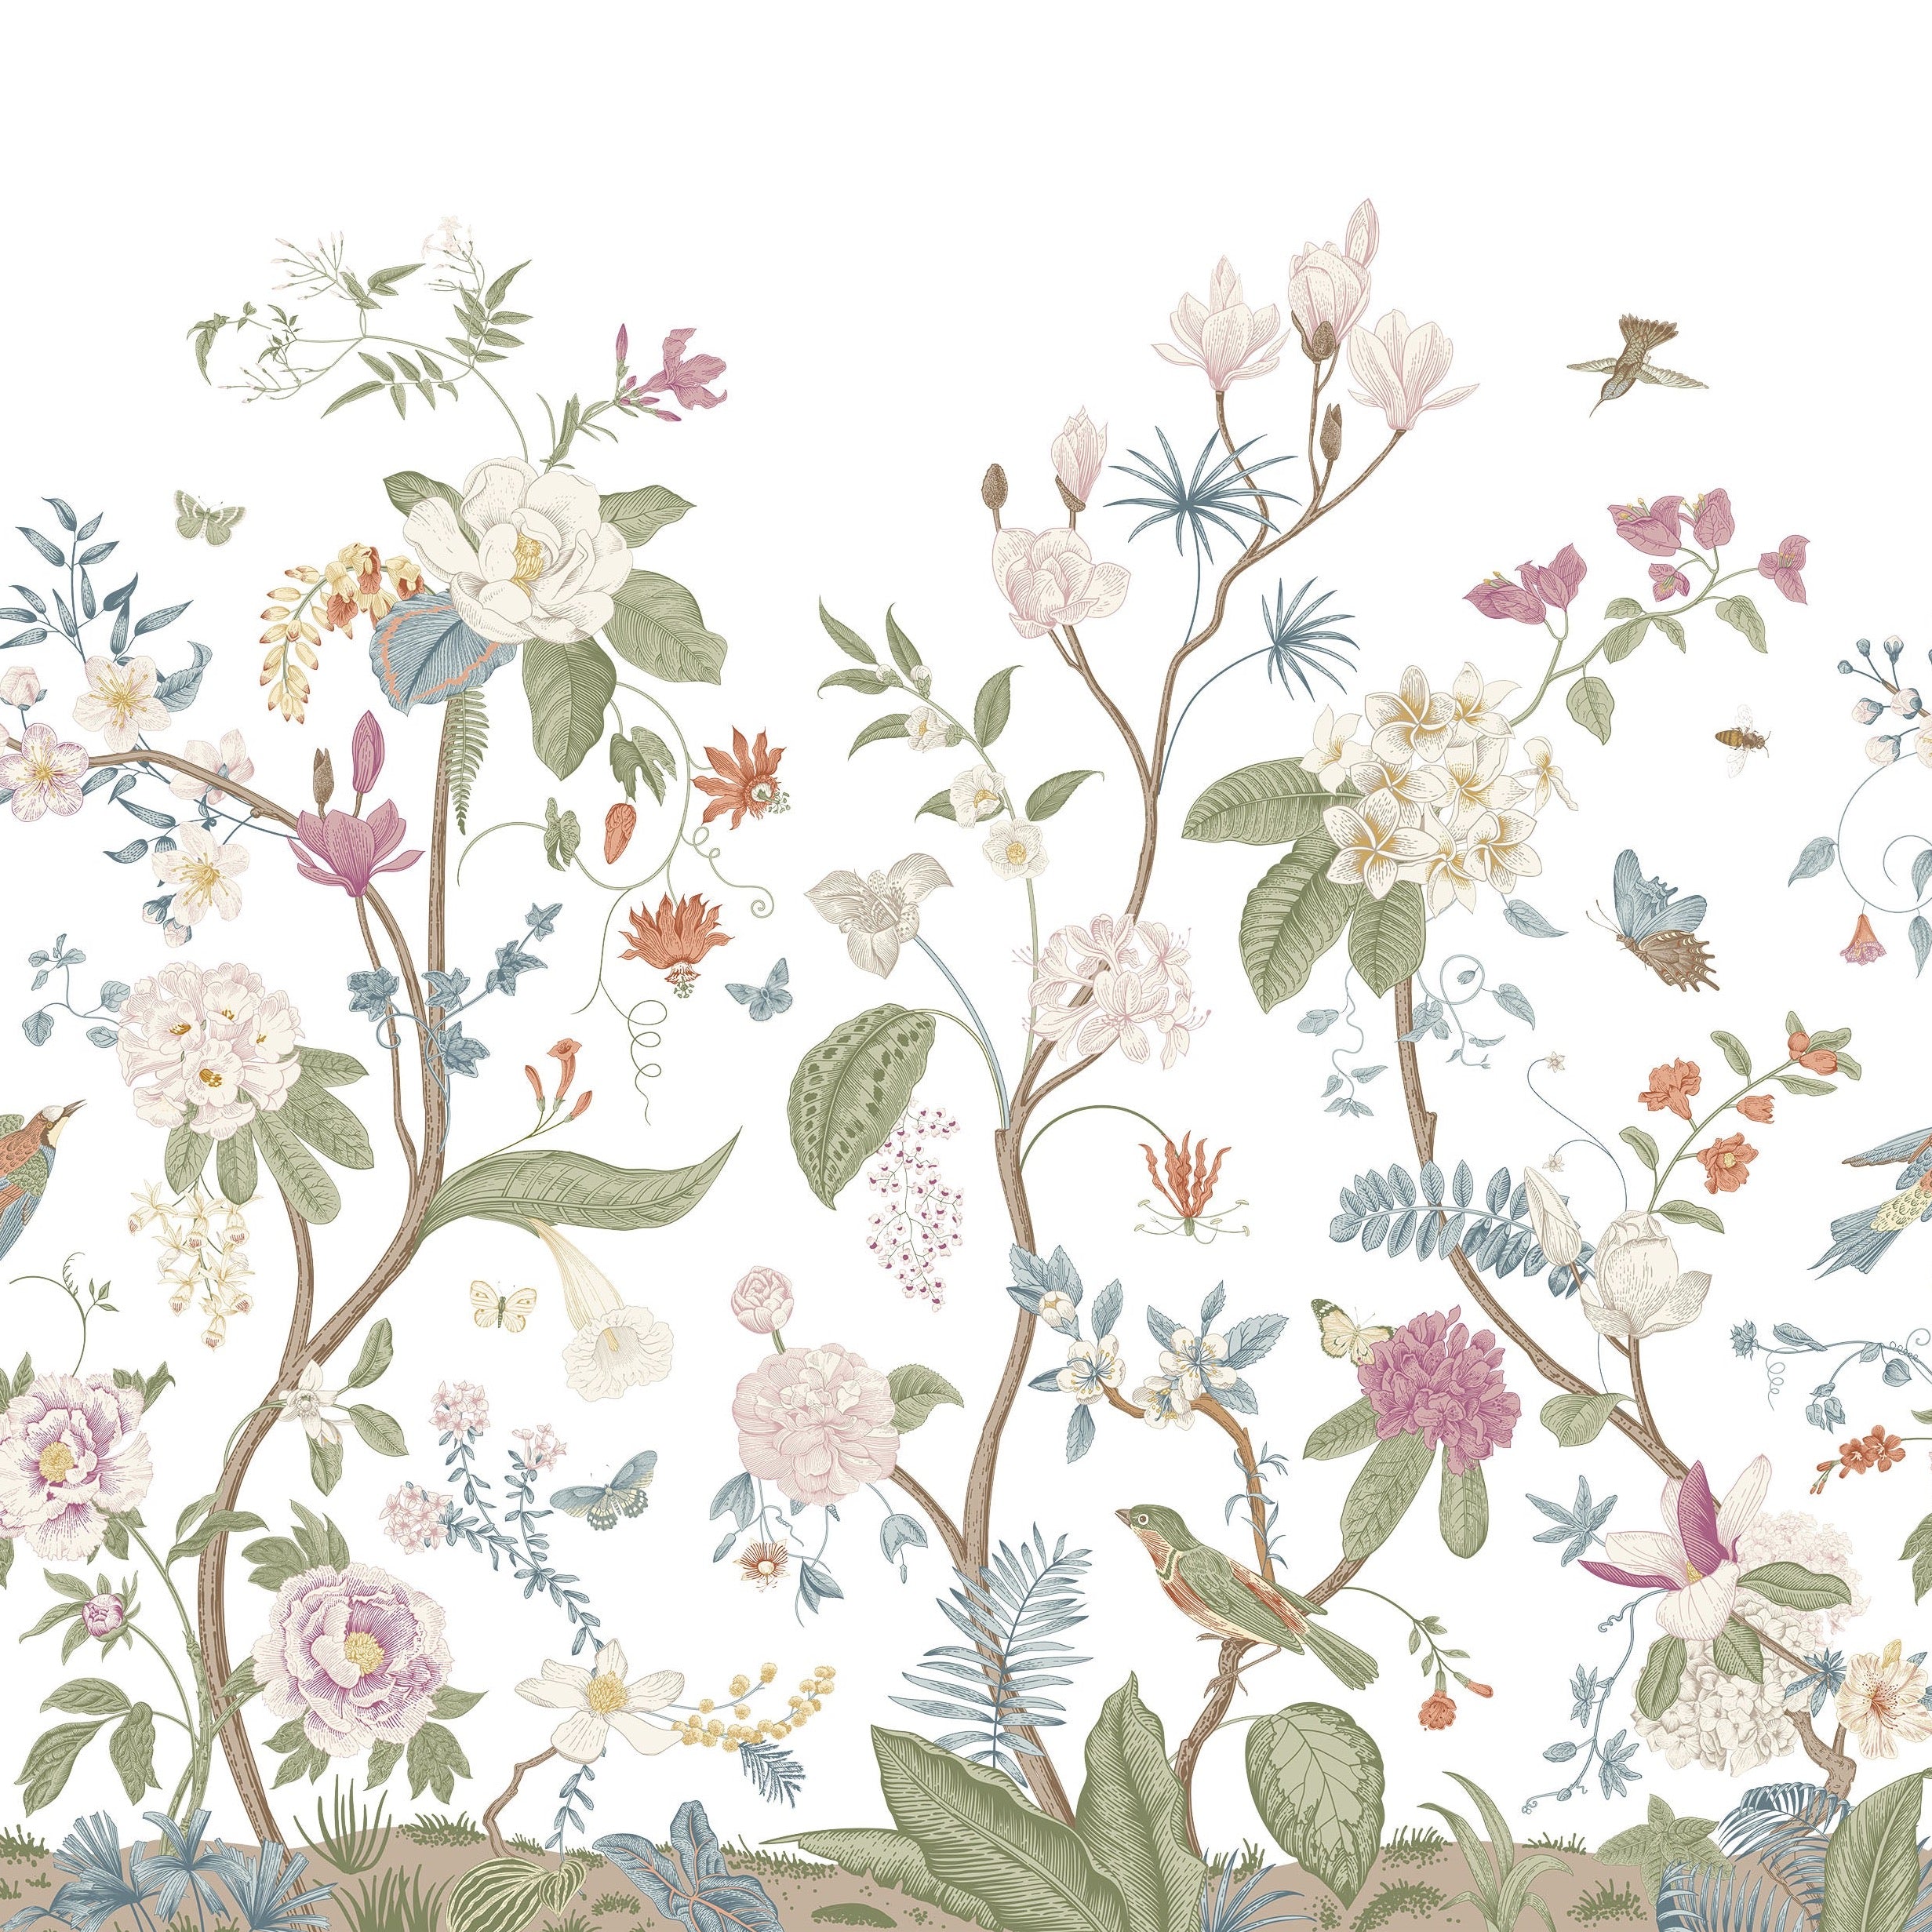 a close-up of the Vintage Floral Mural, allowing for a detailed view of the intricate botanical art. The mural's pattern includes a variety of flowers in soft pastel shades, lush foliage, and playful birds illustrated in a delicate, hand-painted style. This wallpaper design captures the essence of a romantic vintage garden and would lend a sophisticated, timeless feel to any interior space.